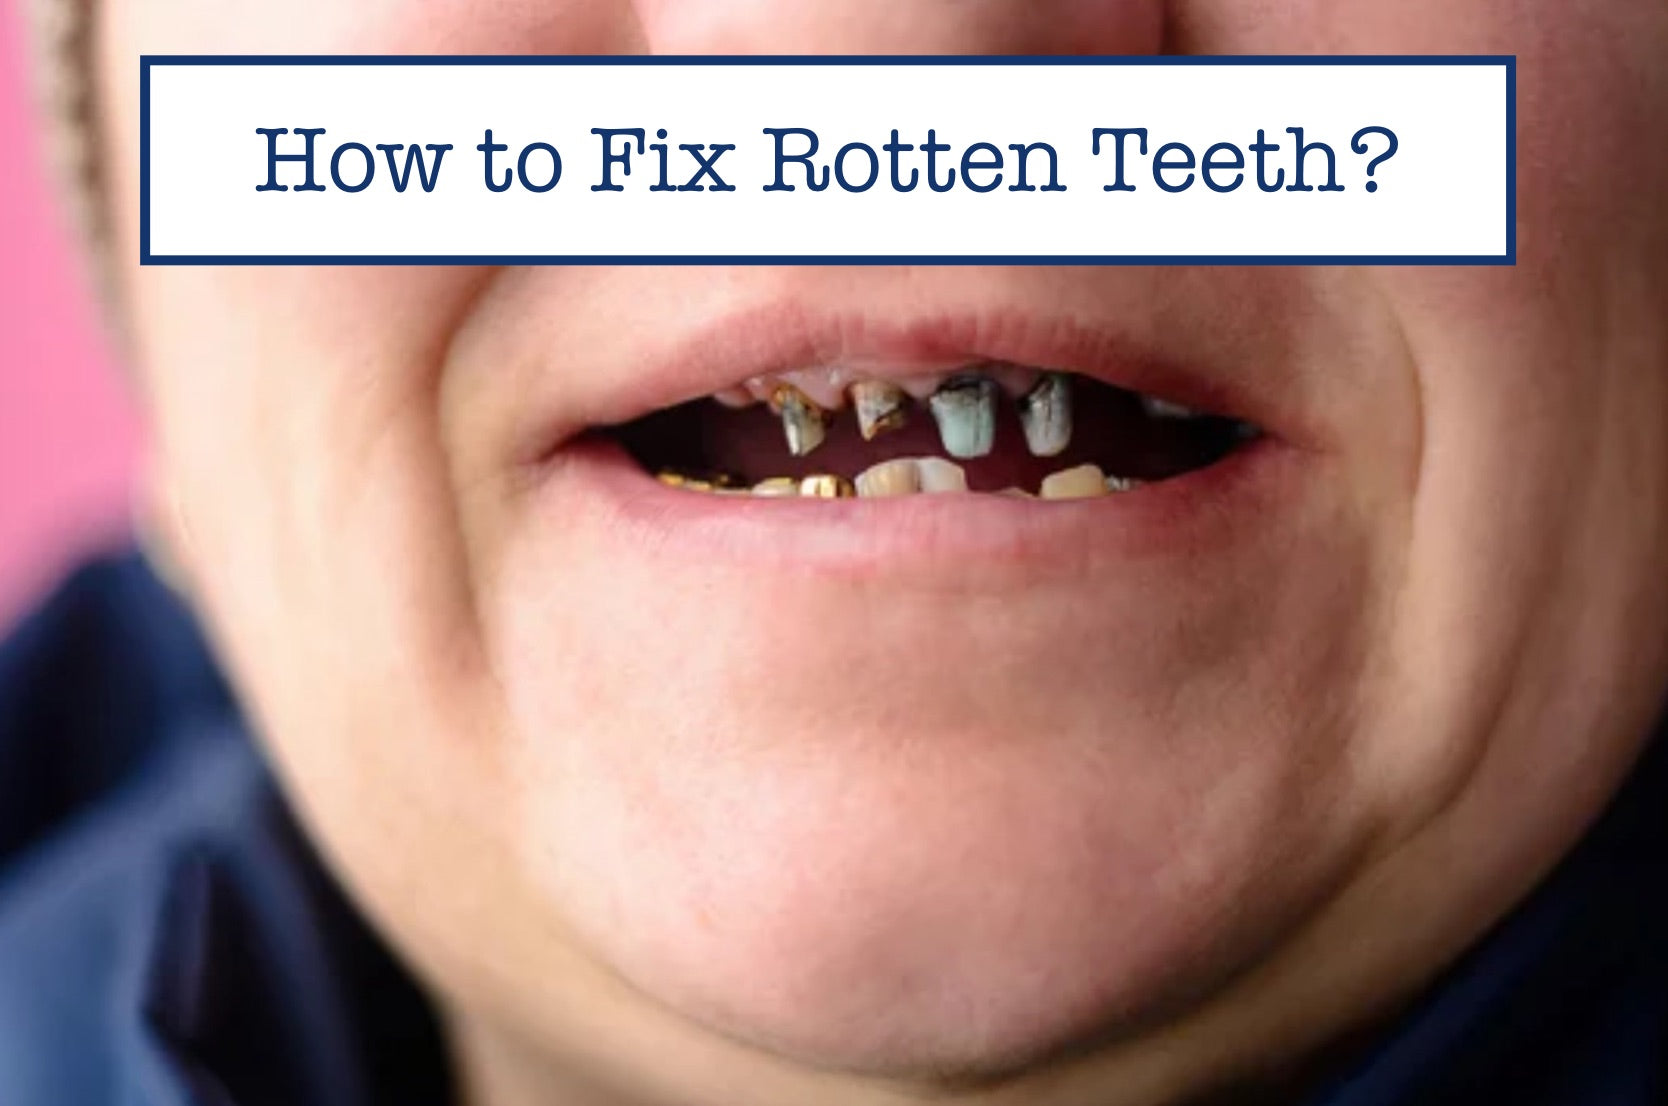 How to Fix Rotten Teeth?